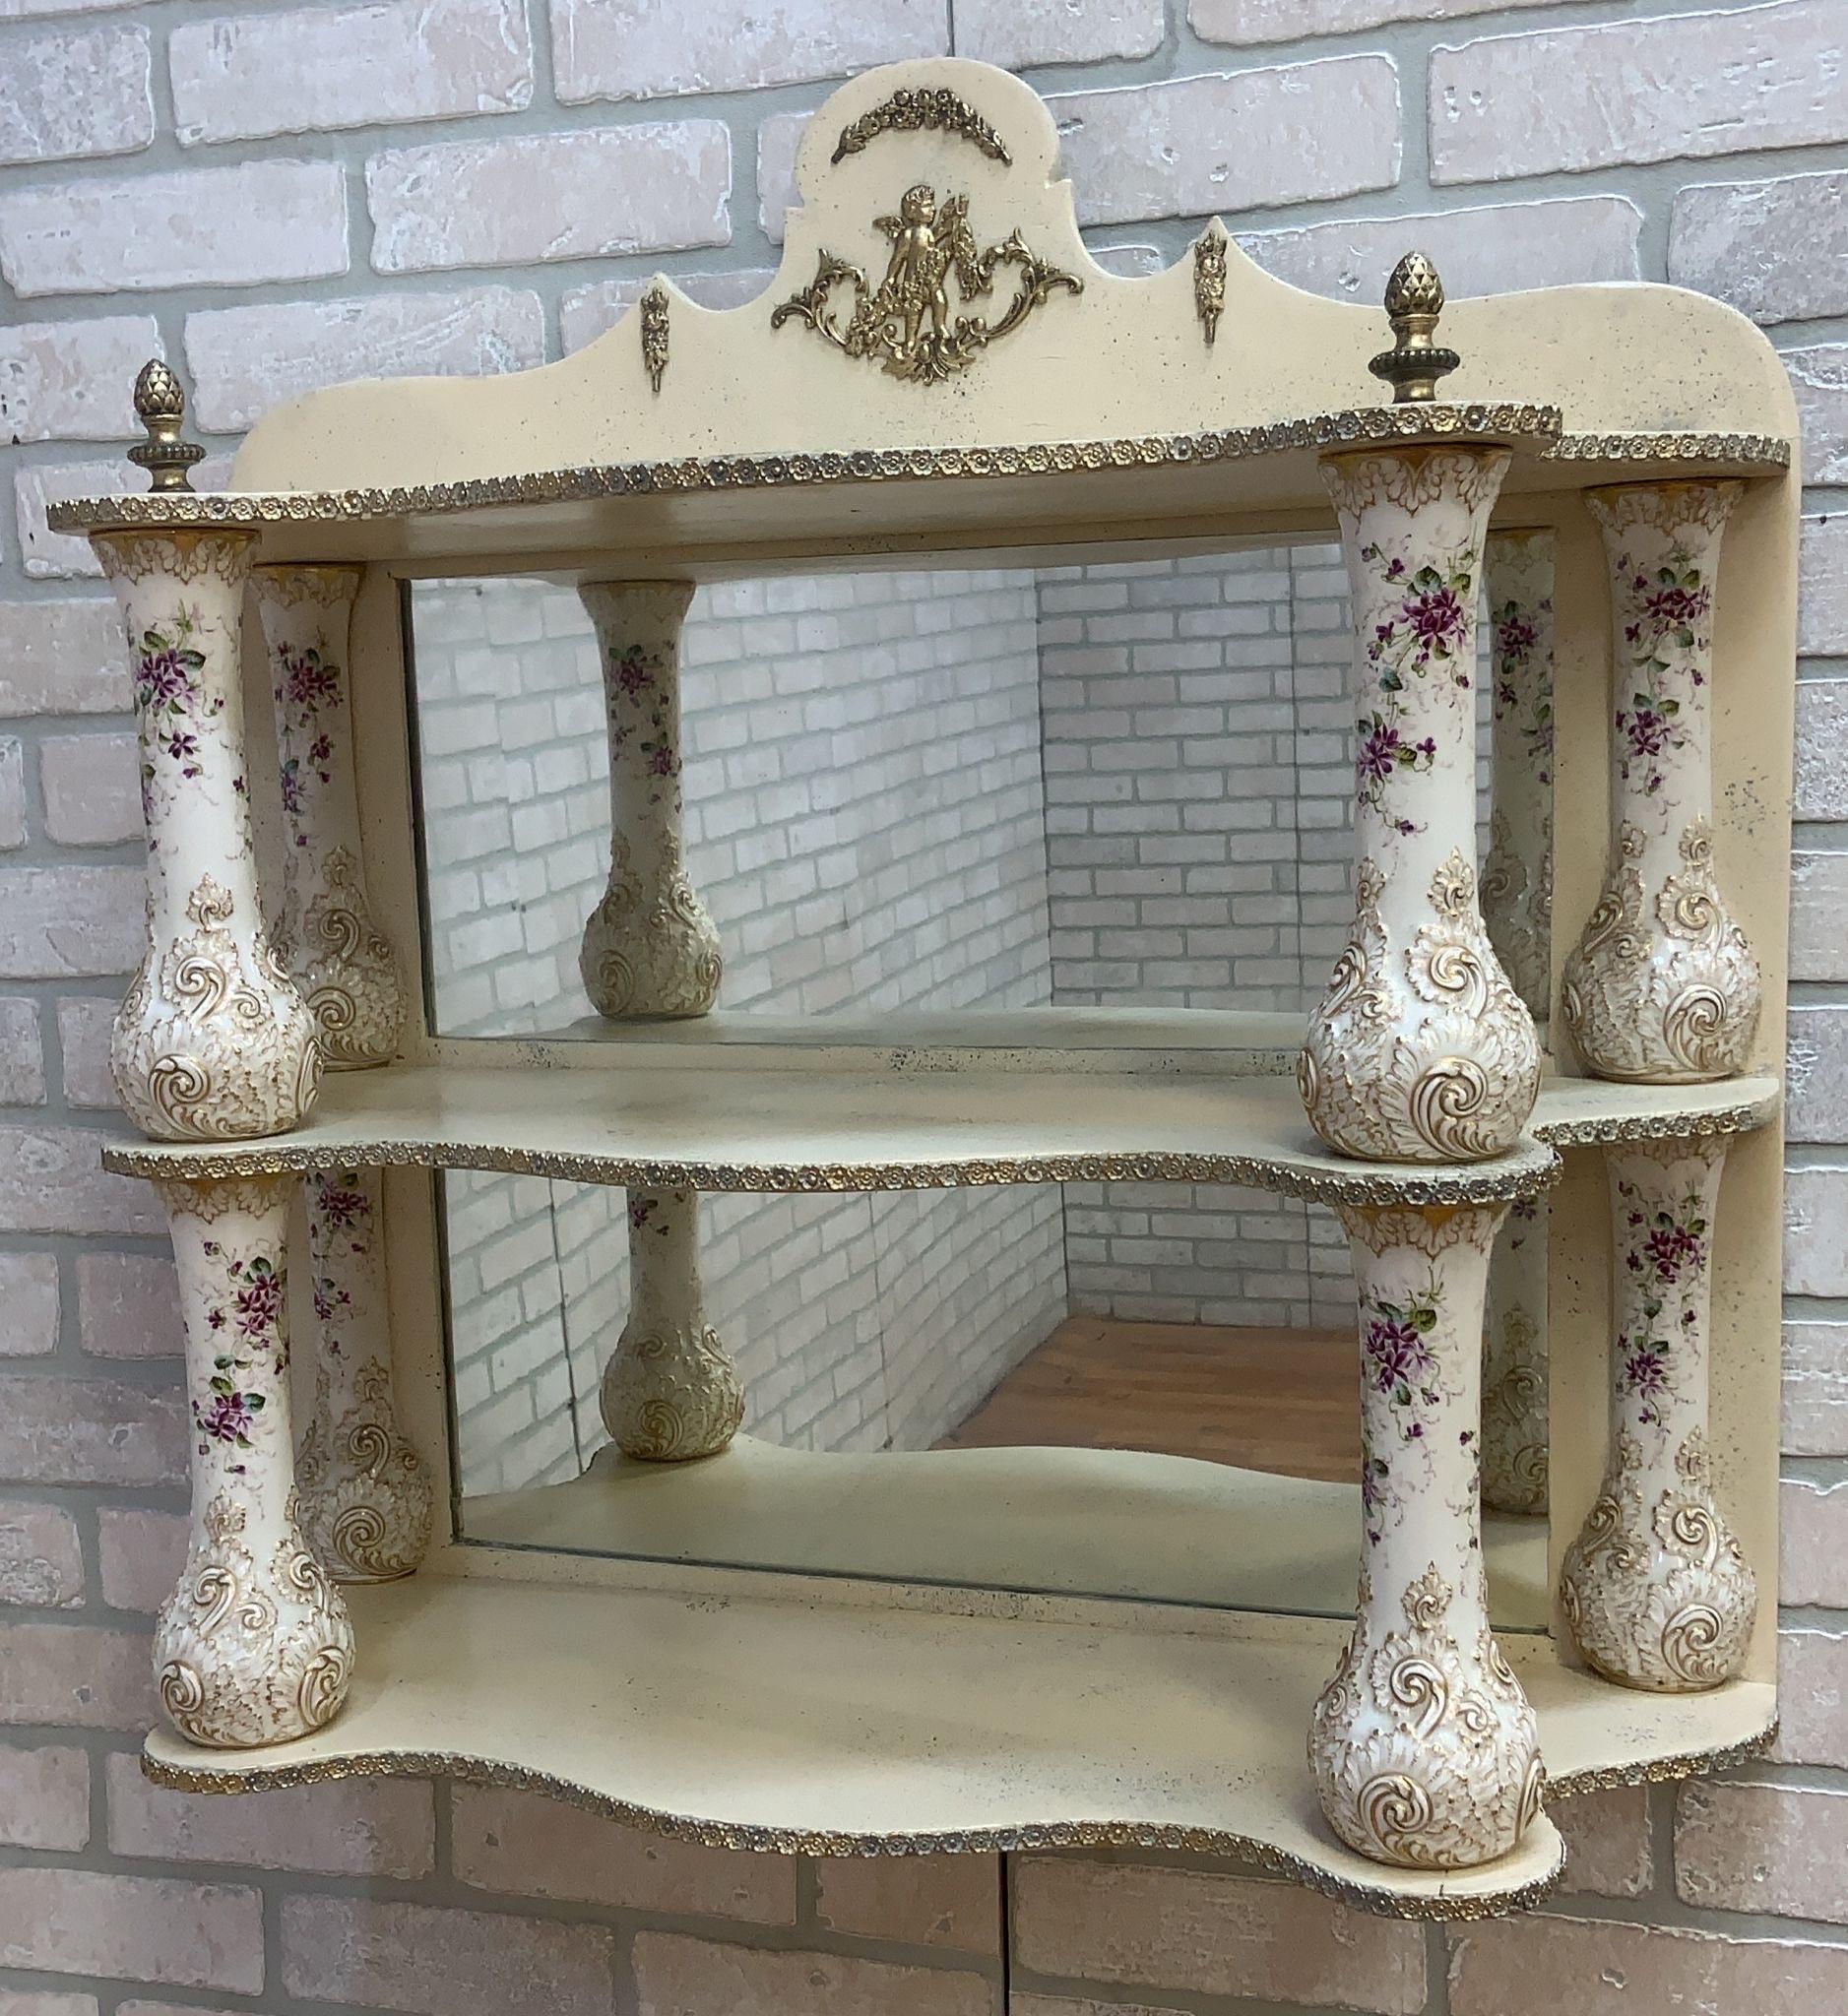 Antique French Hand Painted Porcelain Columned Brass Mounted Mirror Back Dresden Style Wall/Vanity Shelf

Imbued with the grace of Antique French design, this hand-painted porcelain columned wall/vanity shelf stands as a testament to exquisite